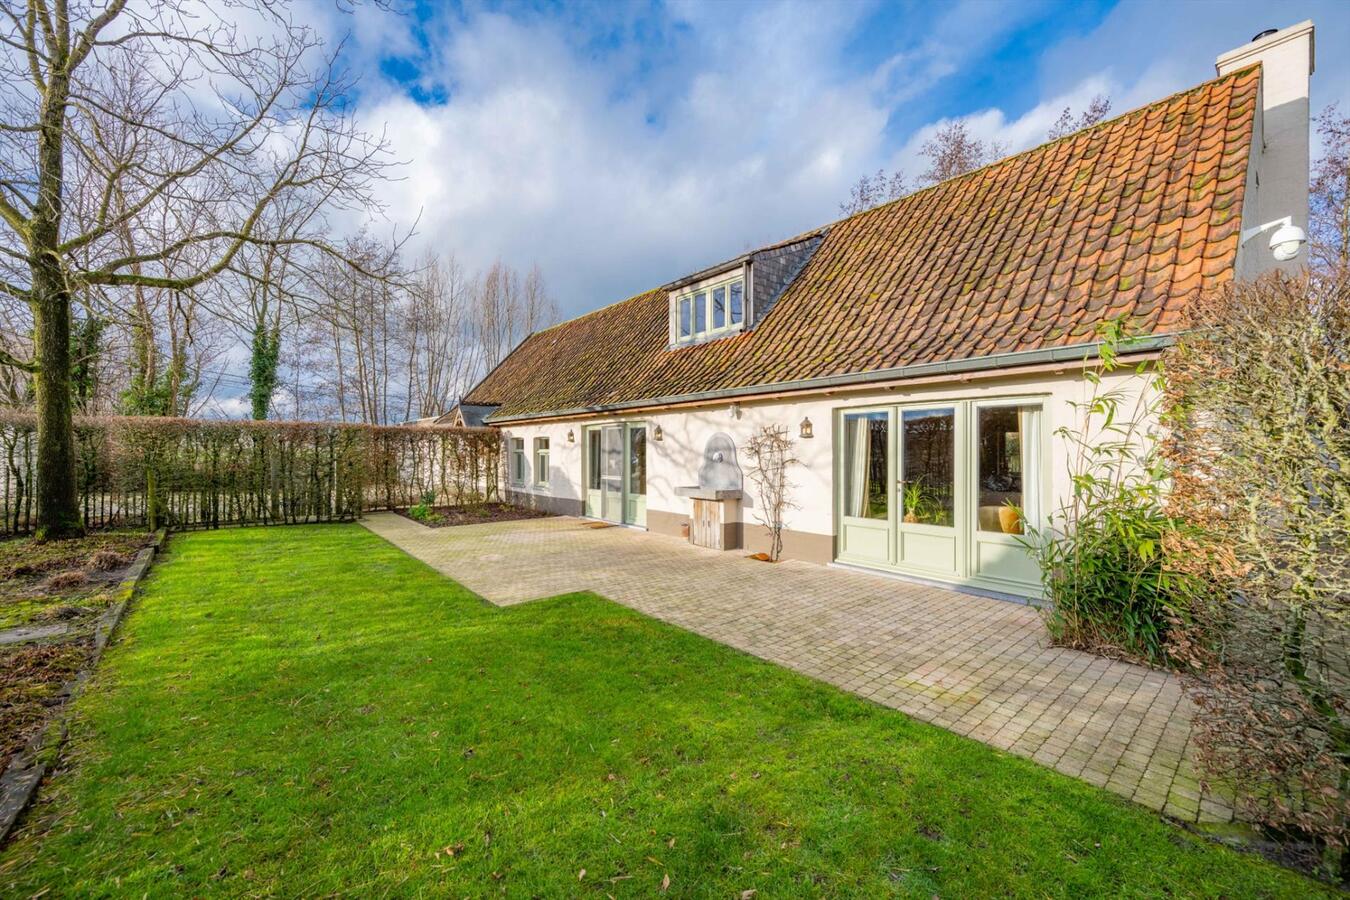 Country house sold in Ruiselede